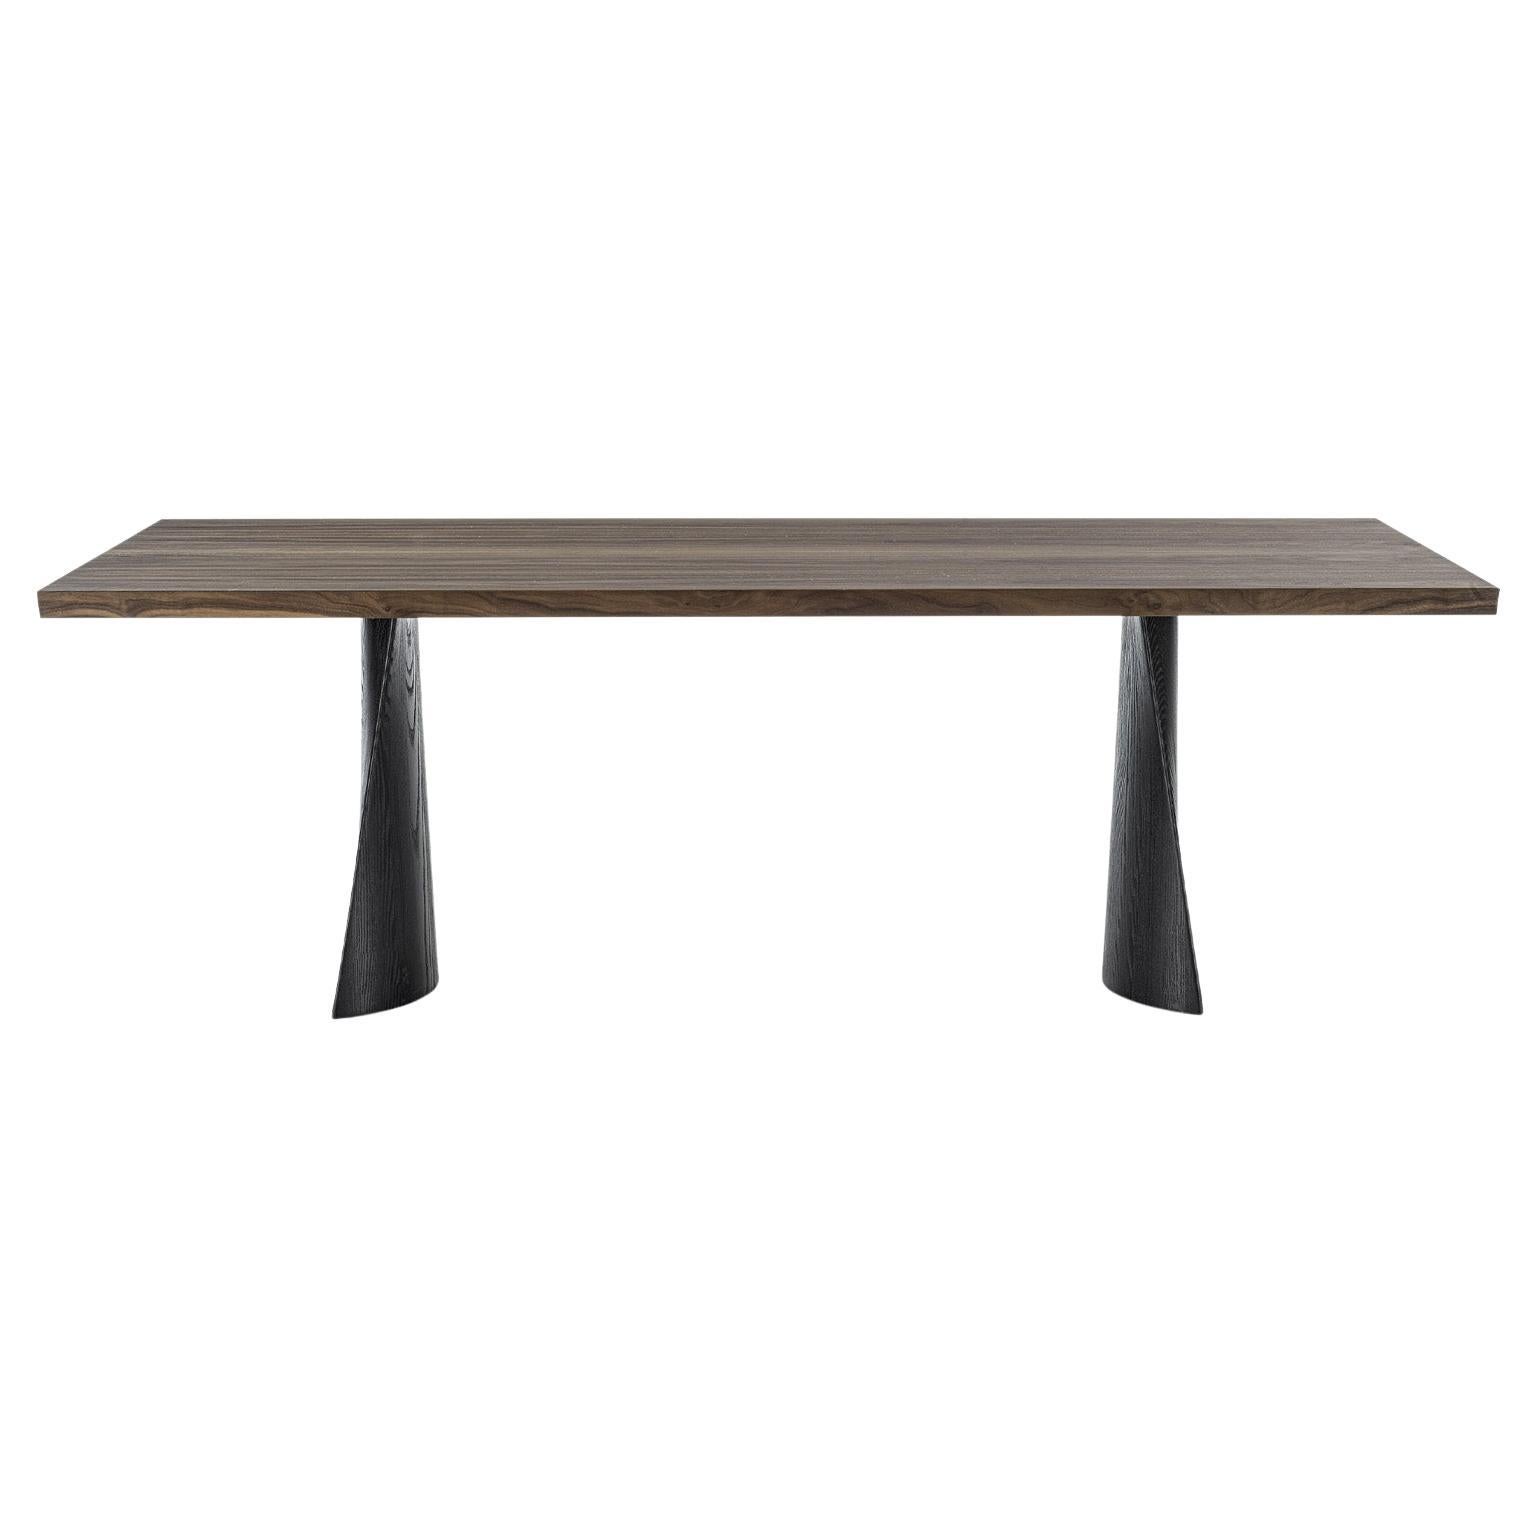 Simple Swing Wood Table, Designed by Studio Excalibur, Made in Italy For Sale